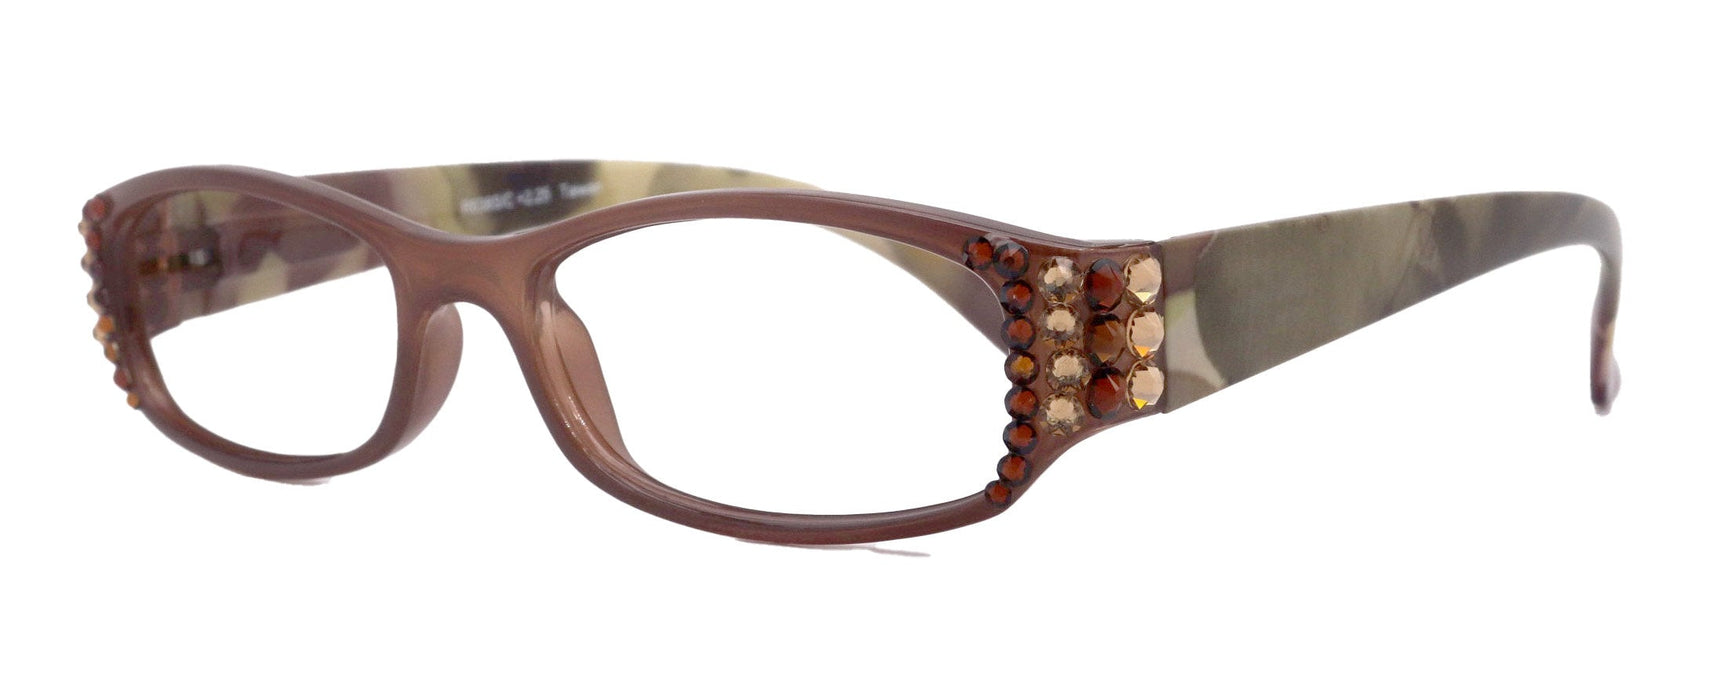 Rosie Bling Reading Glasses Women W (Light Colorado and Copper) Genuine European Crystals (Brown) NY Fifth Avenue